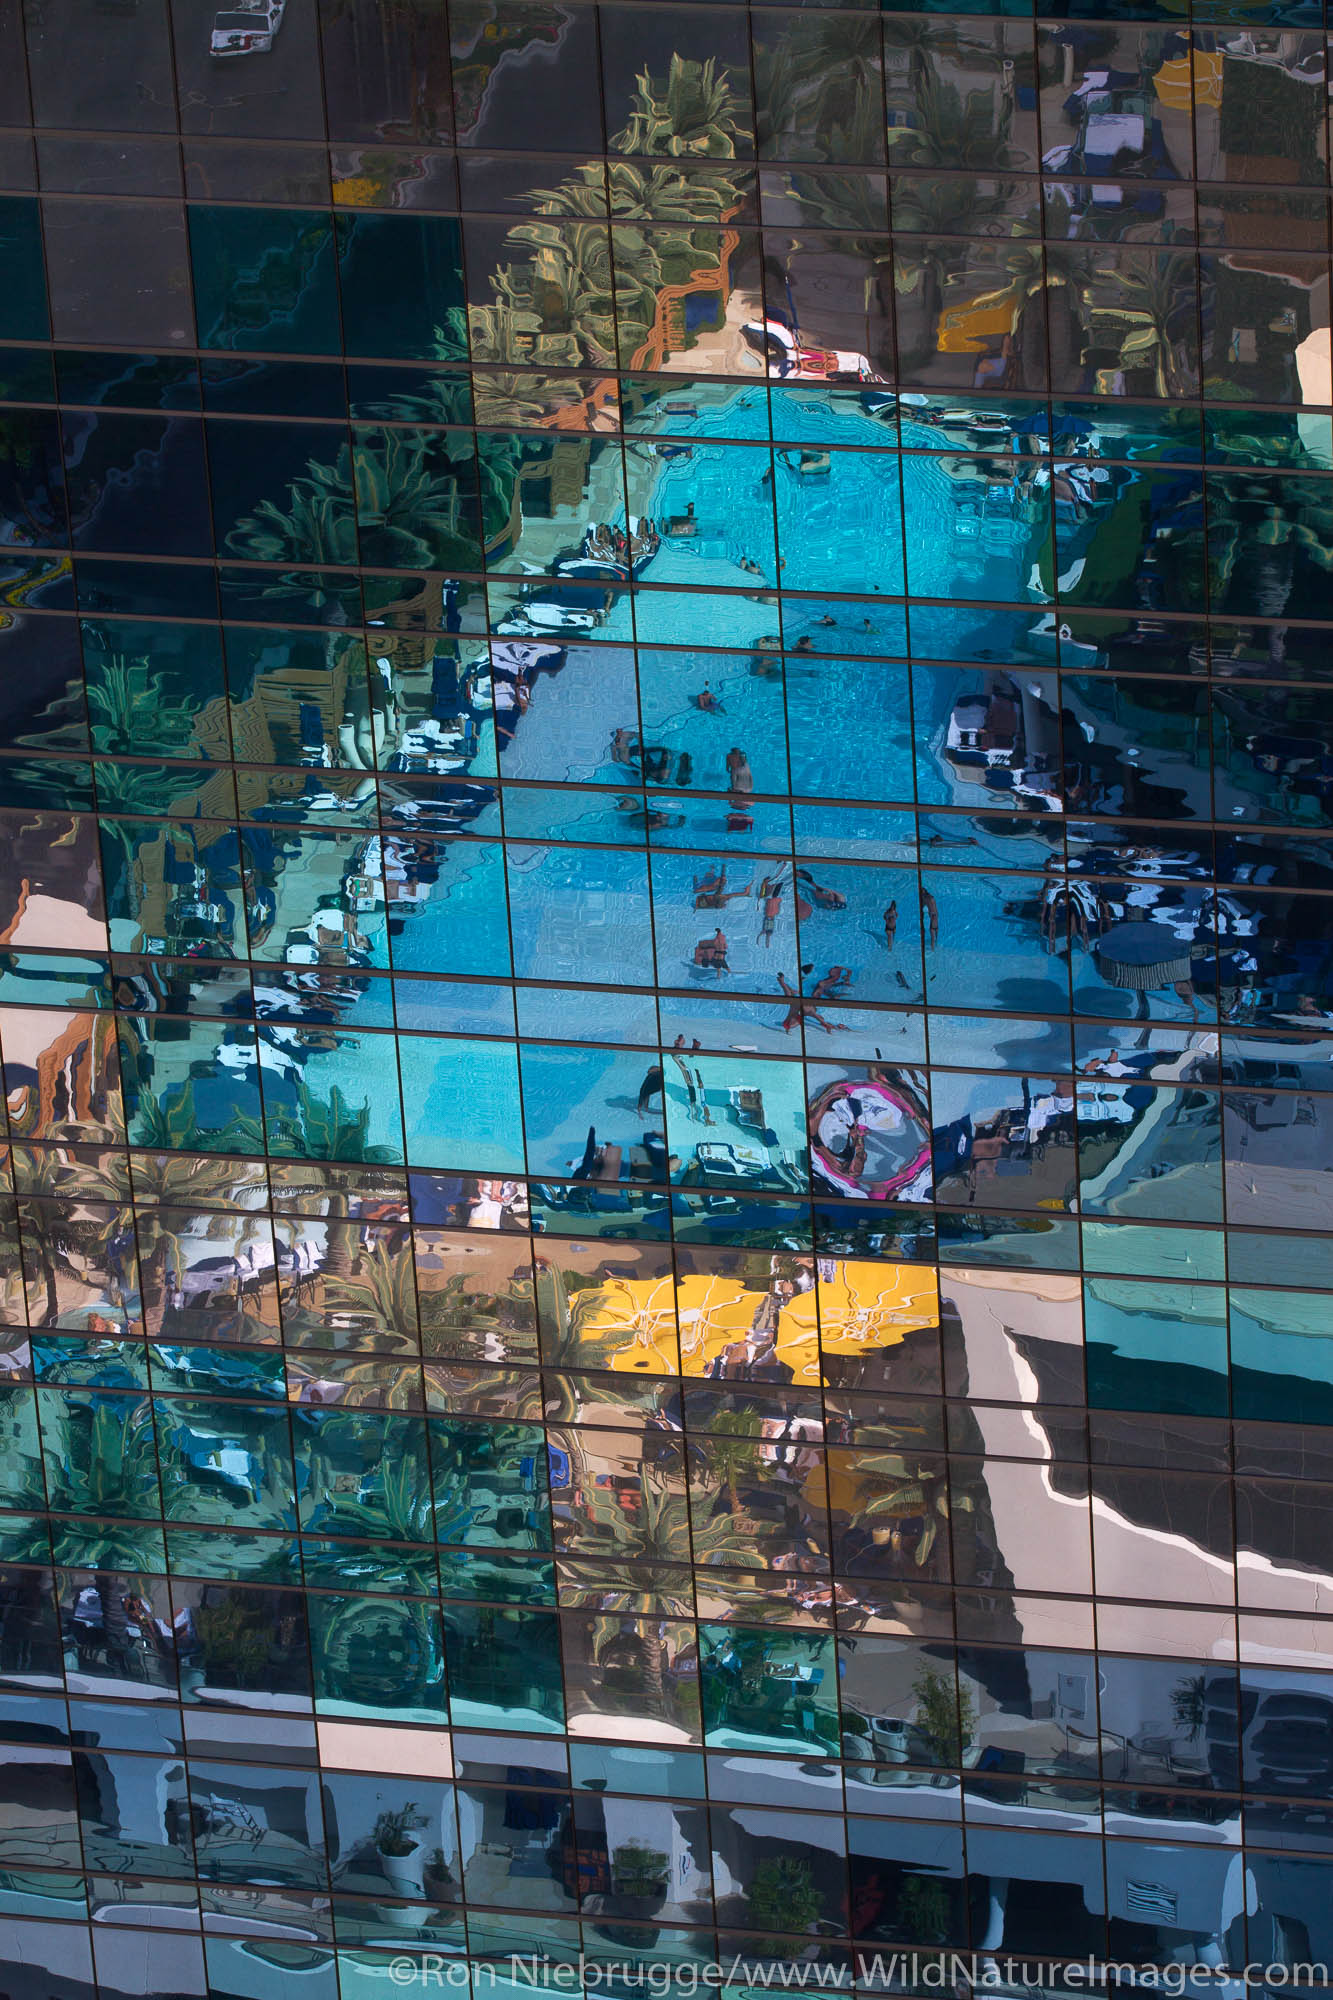 The pool of The Cosmopolitan Hotel and Casino reflect in a nearby building in City Center, Las Vegas, Nevada.